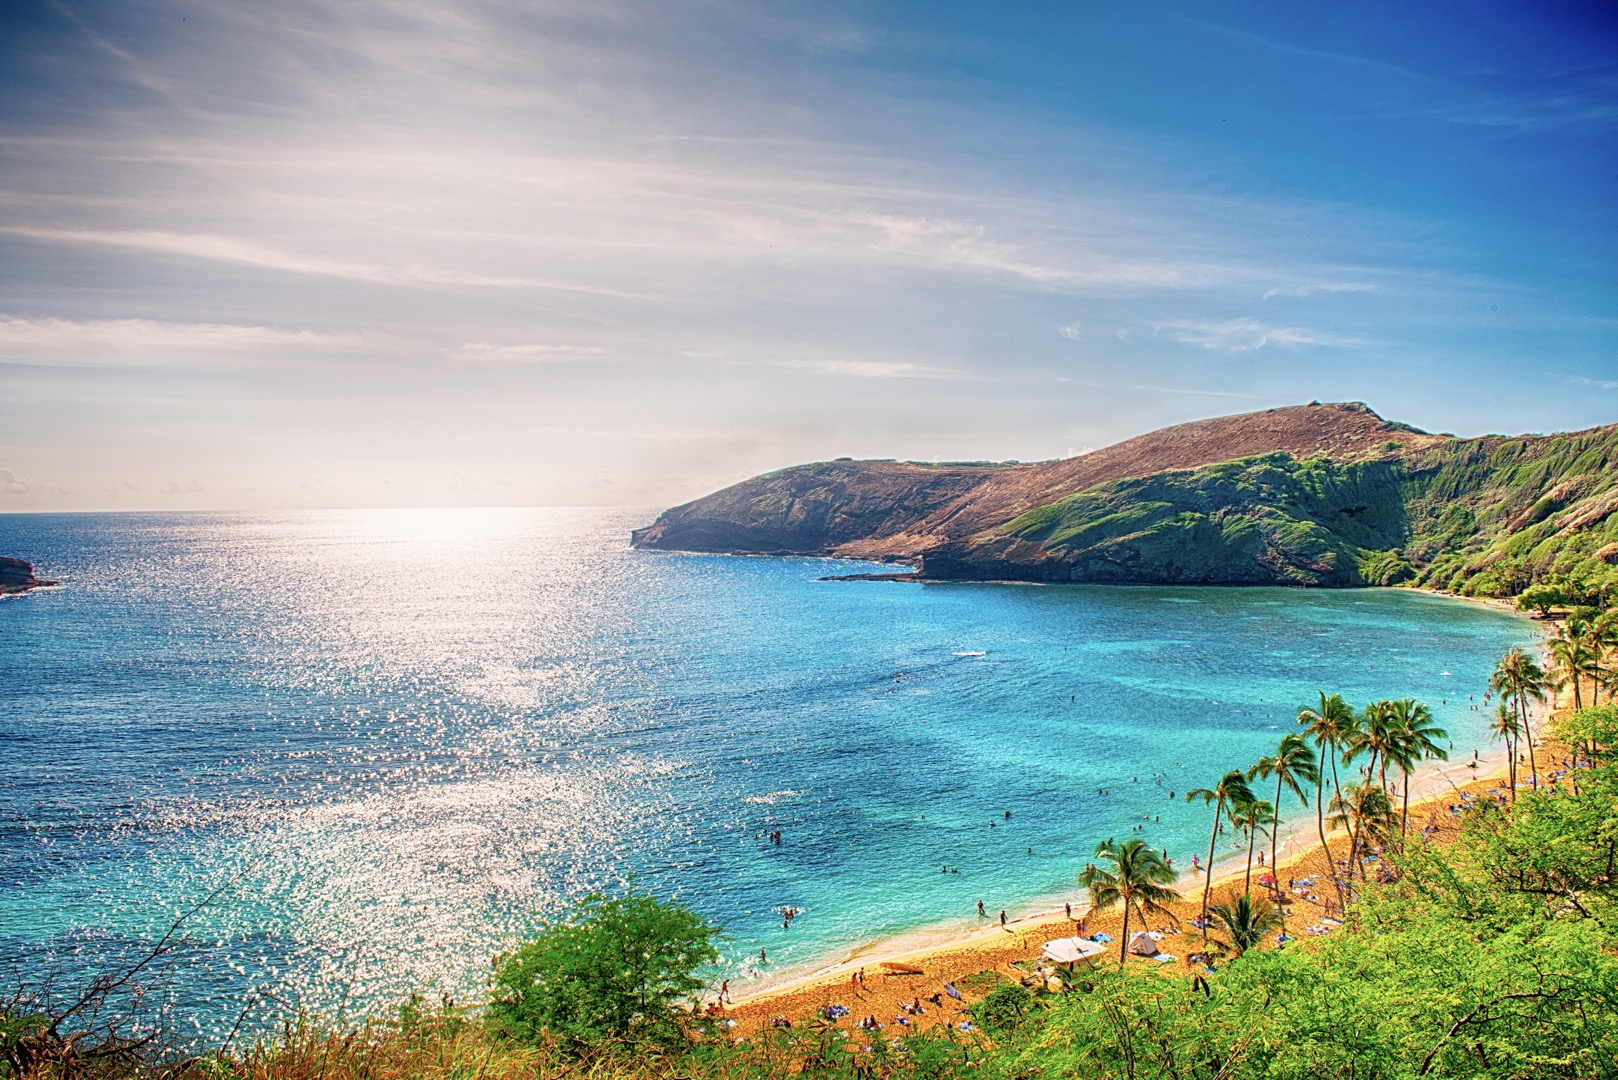 Hanauma Bay Lookout - A well-known lookout point on O’ahu - Mini Circle